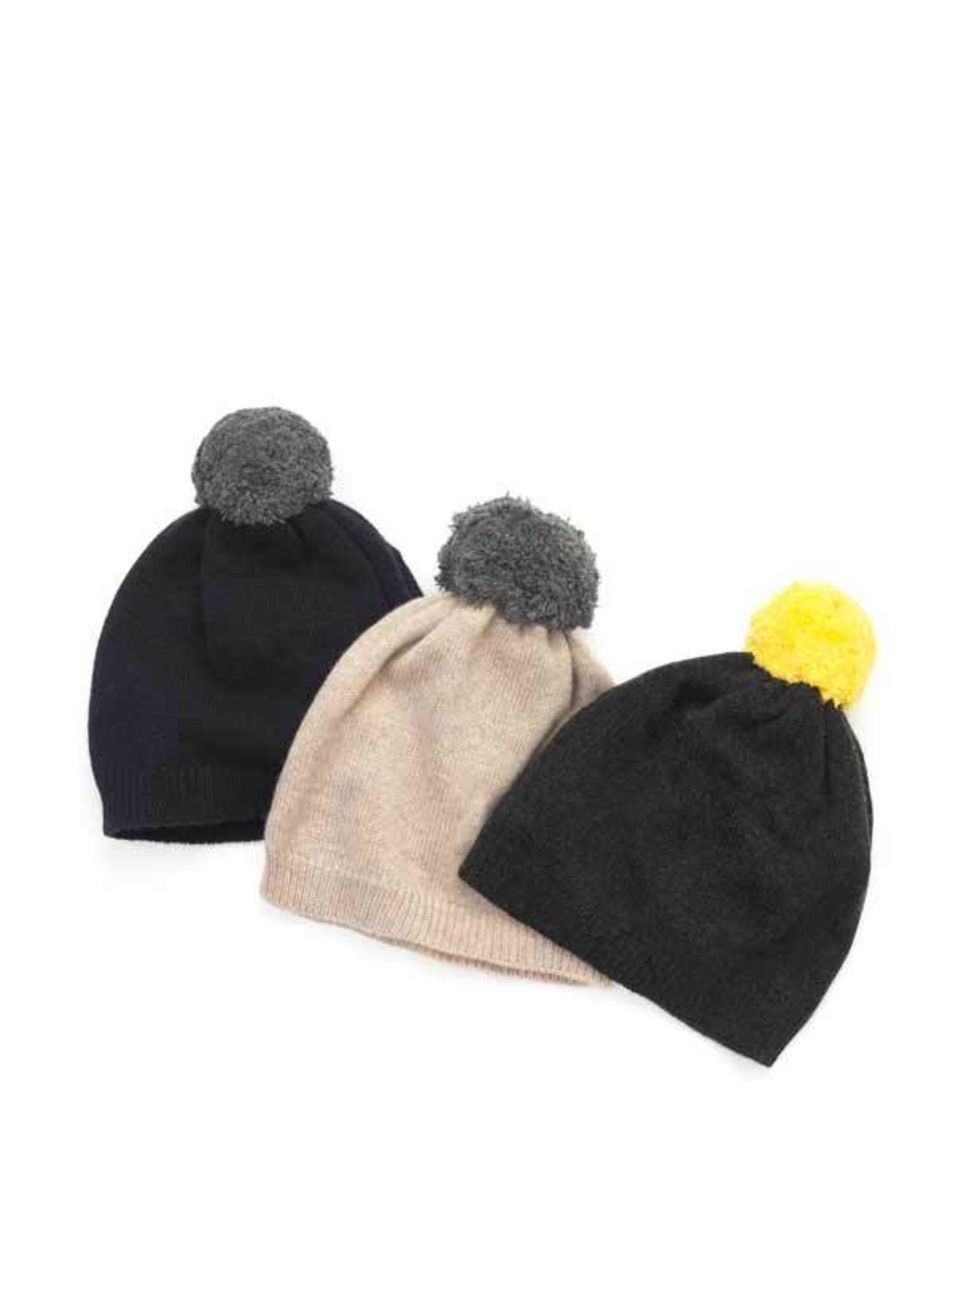 <p> </p><p>Chinti &amp; Parker are one of our favourite knitwear brands and these cute bobble hats give winter dressing a fun twist. <a href="http://www.chintiandparker.com/product/CP51/Chinti+and+Parker+Bobble+Hat">Chinti &amp; Parker</a> bobble hats, £3